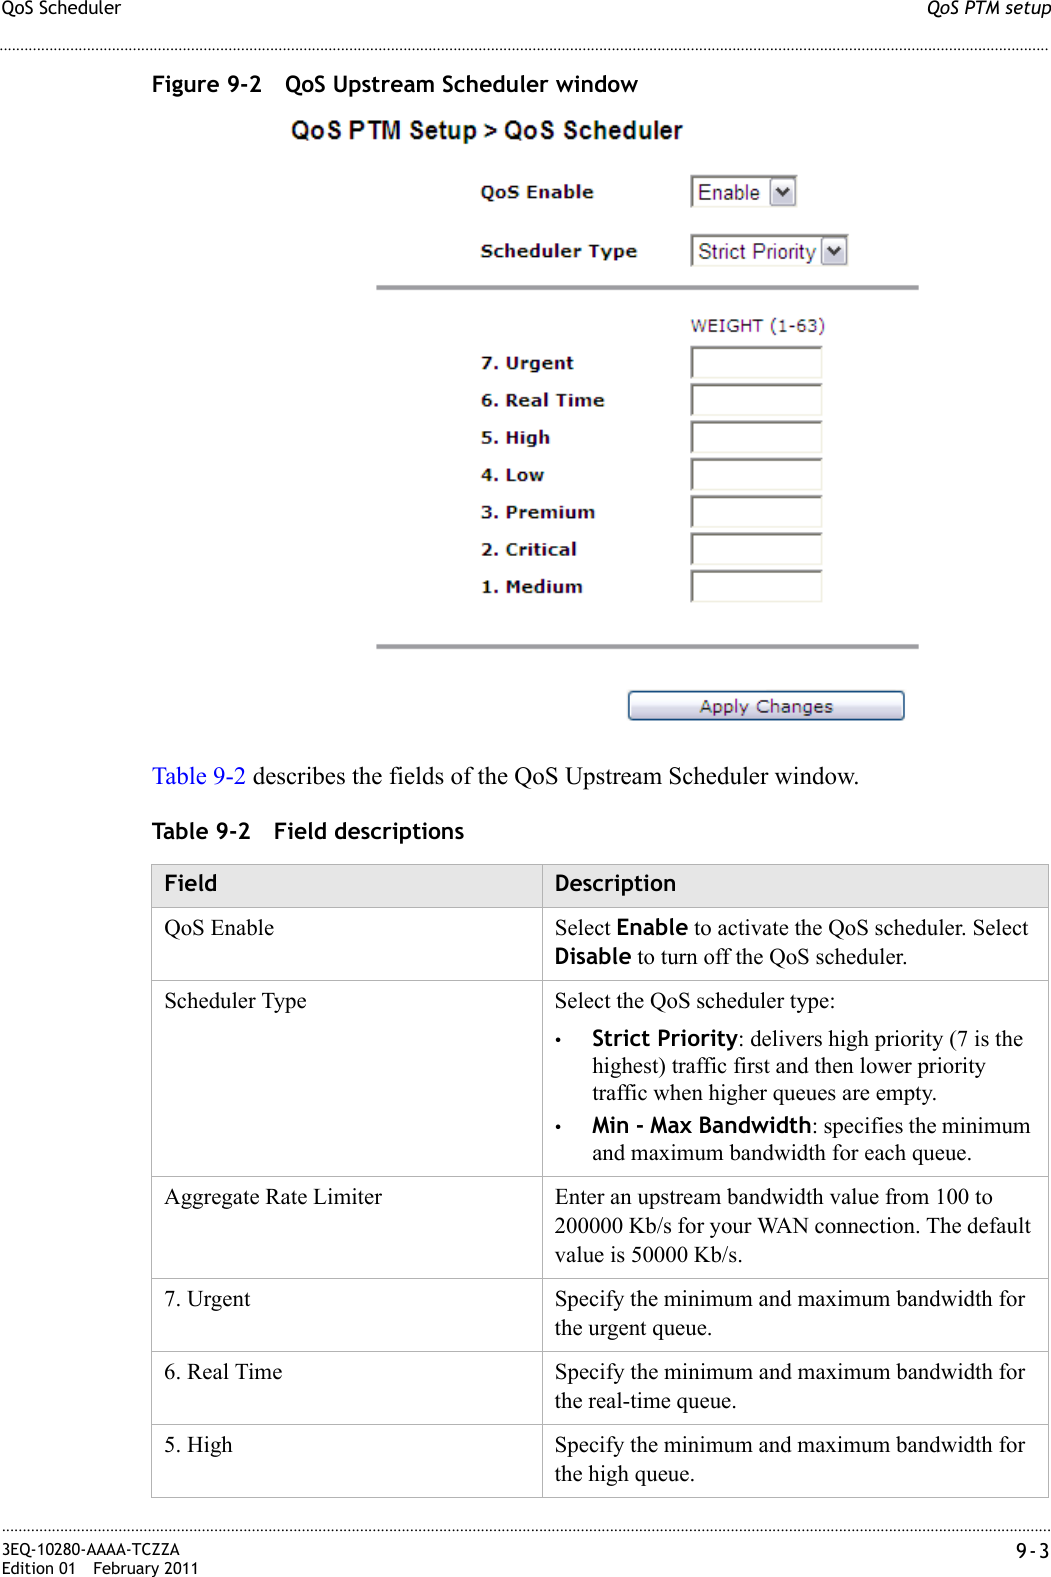 QoS PTM setupQoS Scheduler............................................................................................................................................................................................................................................................3EQ-10280-AAAA-TCZZAEdition 01 February 2011 9-3............................................................................................................................................................................................................................................................Figure 9-2 QoS Upstream Scheduler windowTable 9-2 describes the fields of the QoS Upstream Scheduler window.Table 9-2 Field descriptionsField DescriptionQoS Enable Select Enable to activate the QoS scheduler. Select Disable to turn off the QoS scheduler.Scheduler Type Select the QoS scheduler type:•Strict Priority: delivers high priority (7 is the highest) traffic first and then lower priority traffic when higher queues are empty.•Min - Max Bandwidth: specifies the minimum and maximum bandwidth for each queue.Aggregate Rate Limiter Enter an upstream bandwidth value from 100 to 200000 Kb/s for your WAN connection. The default value is 50000 Kb/s.7. Urgent Specify the minimum and maximum bandwidth for the urgent queue.6. Real Time Specify the minimum and maximum bandwidth for the real-time queue.5. High Specify the minimum and maximum bandwidth for the high queue.